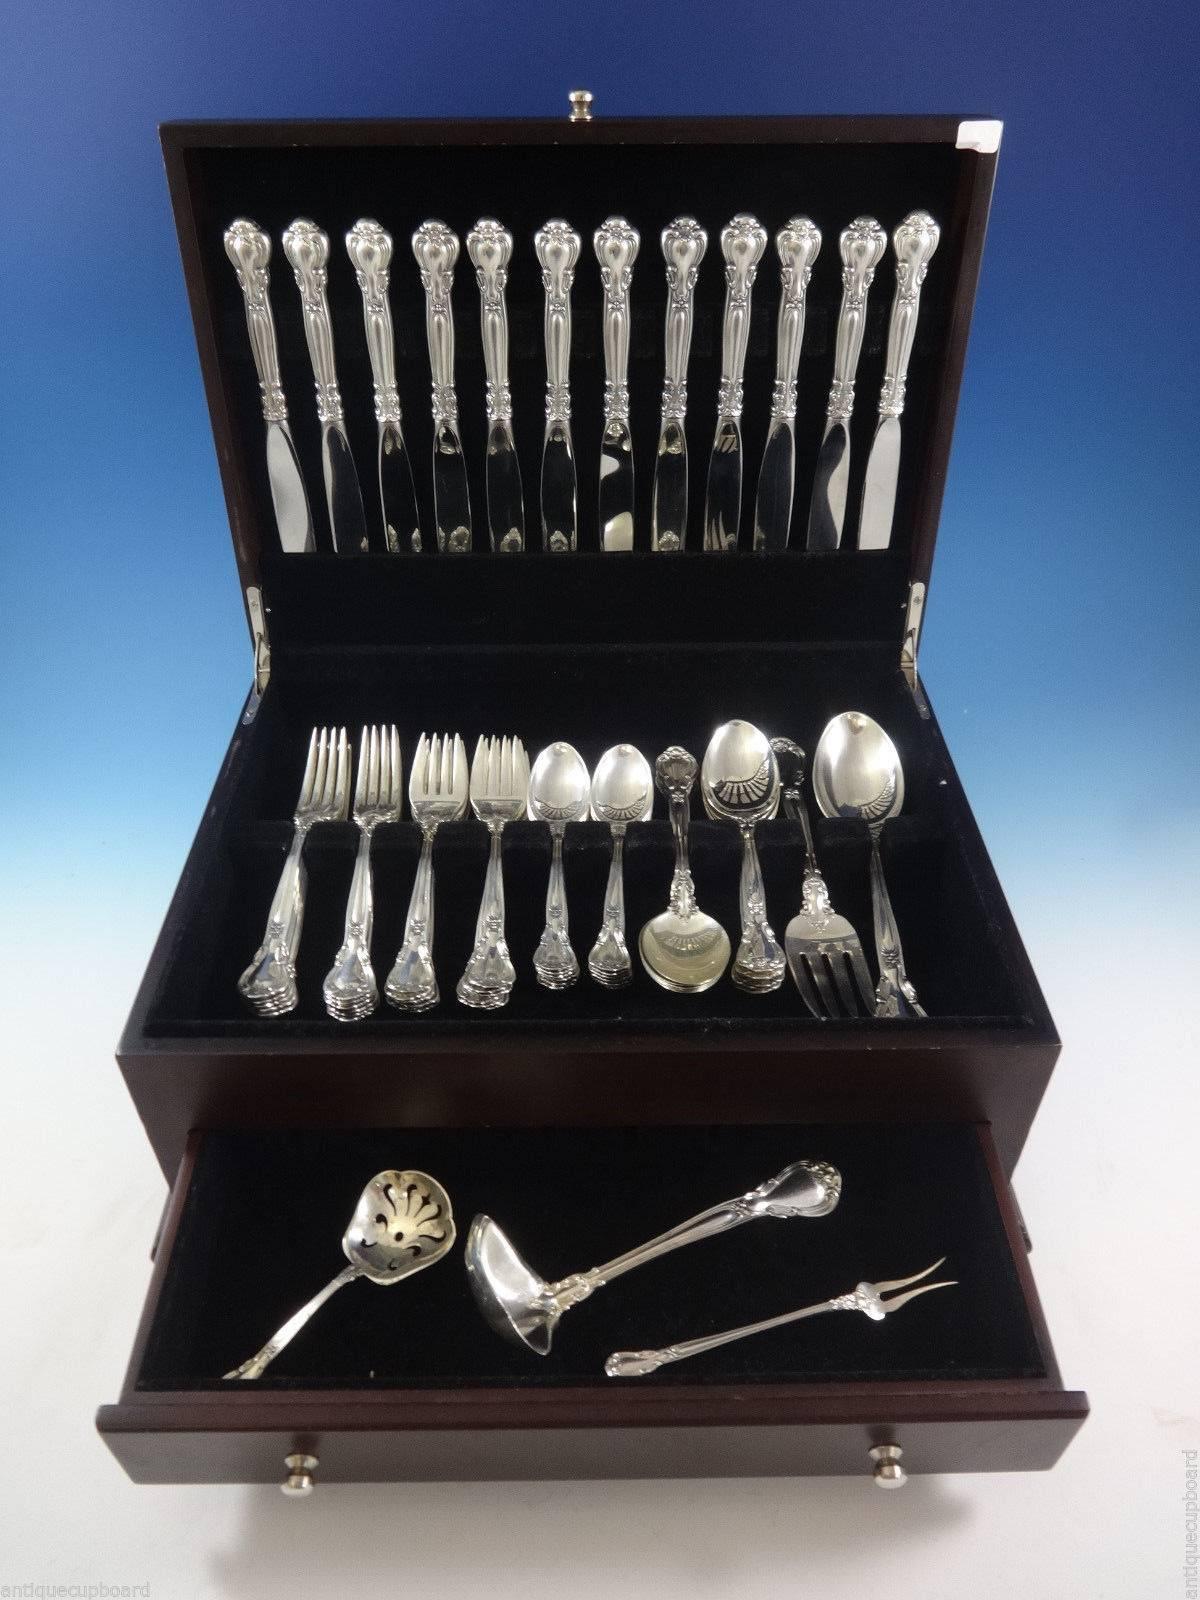 Chantilly BY Gorham sterling silver flatware set, 65 Pieces. This set includes: 

12 knives, 8 7/8